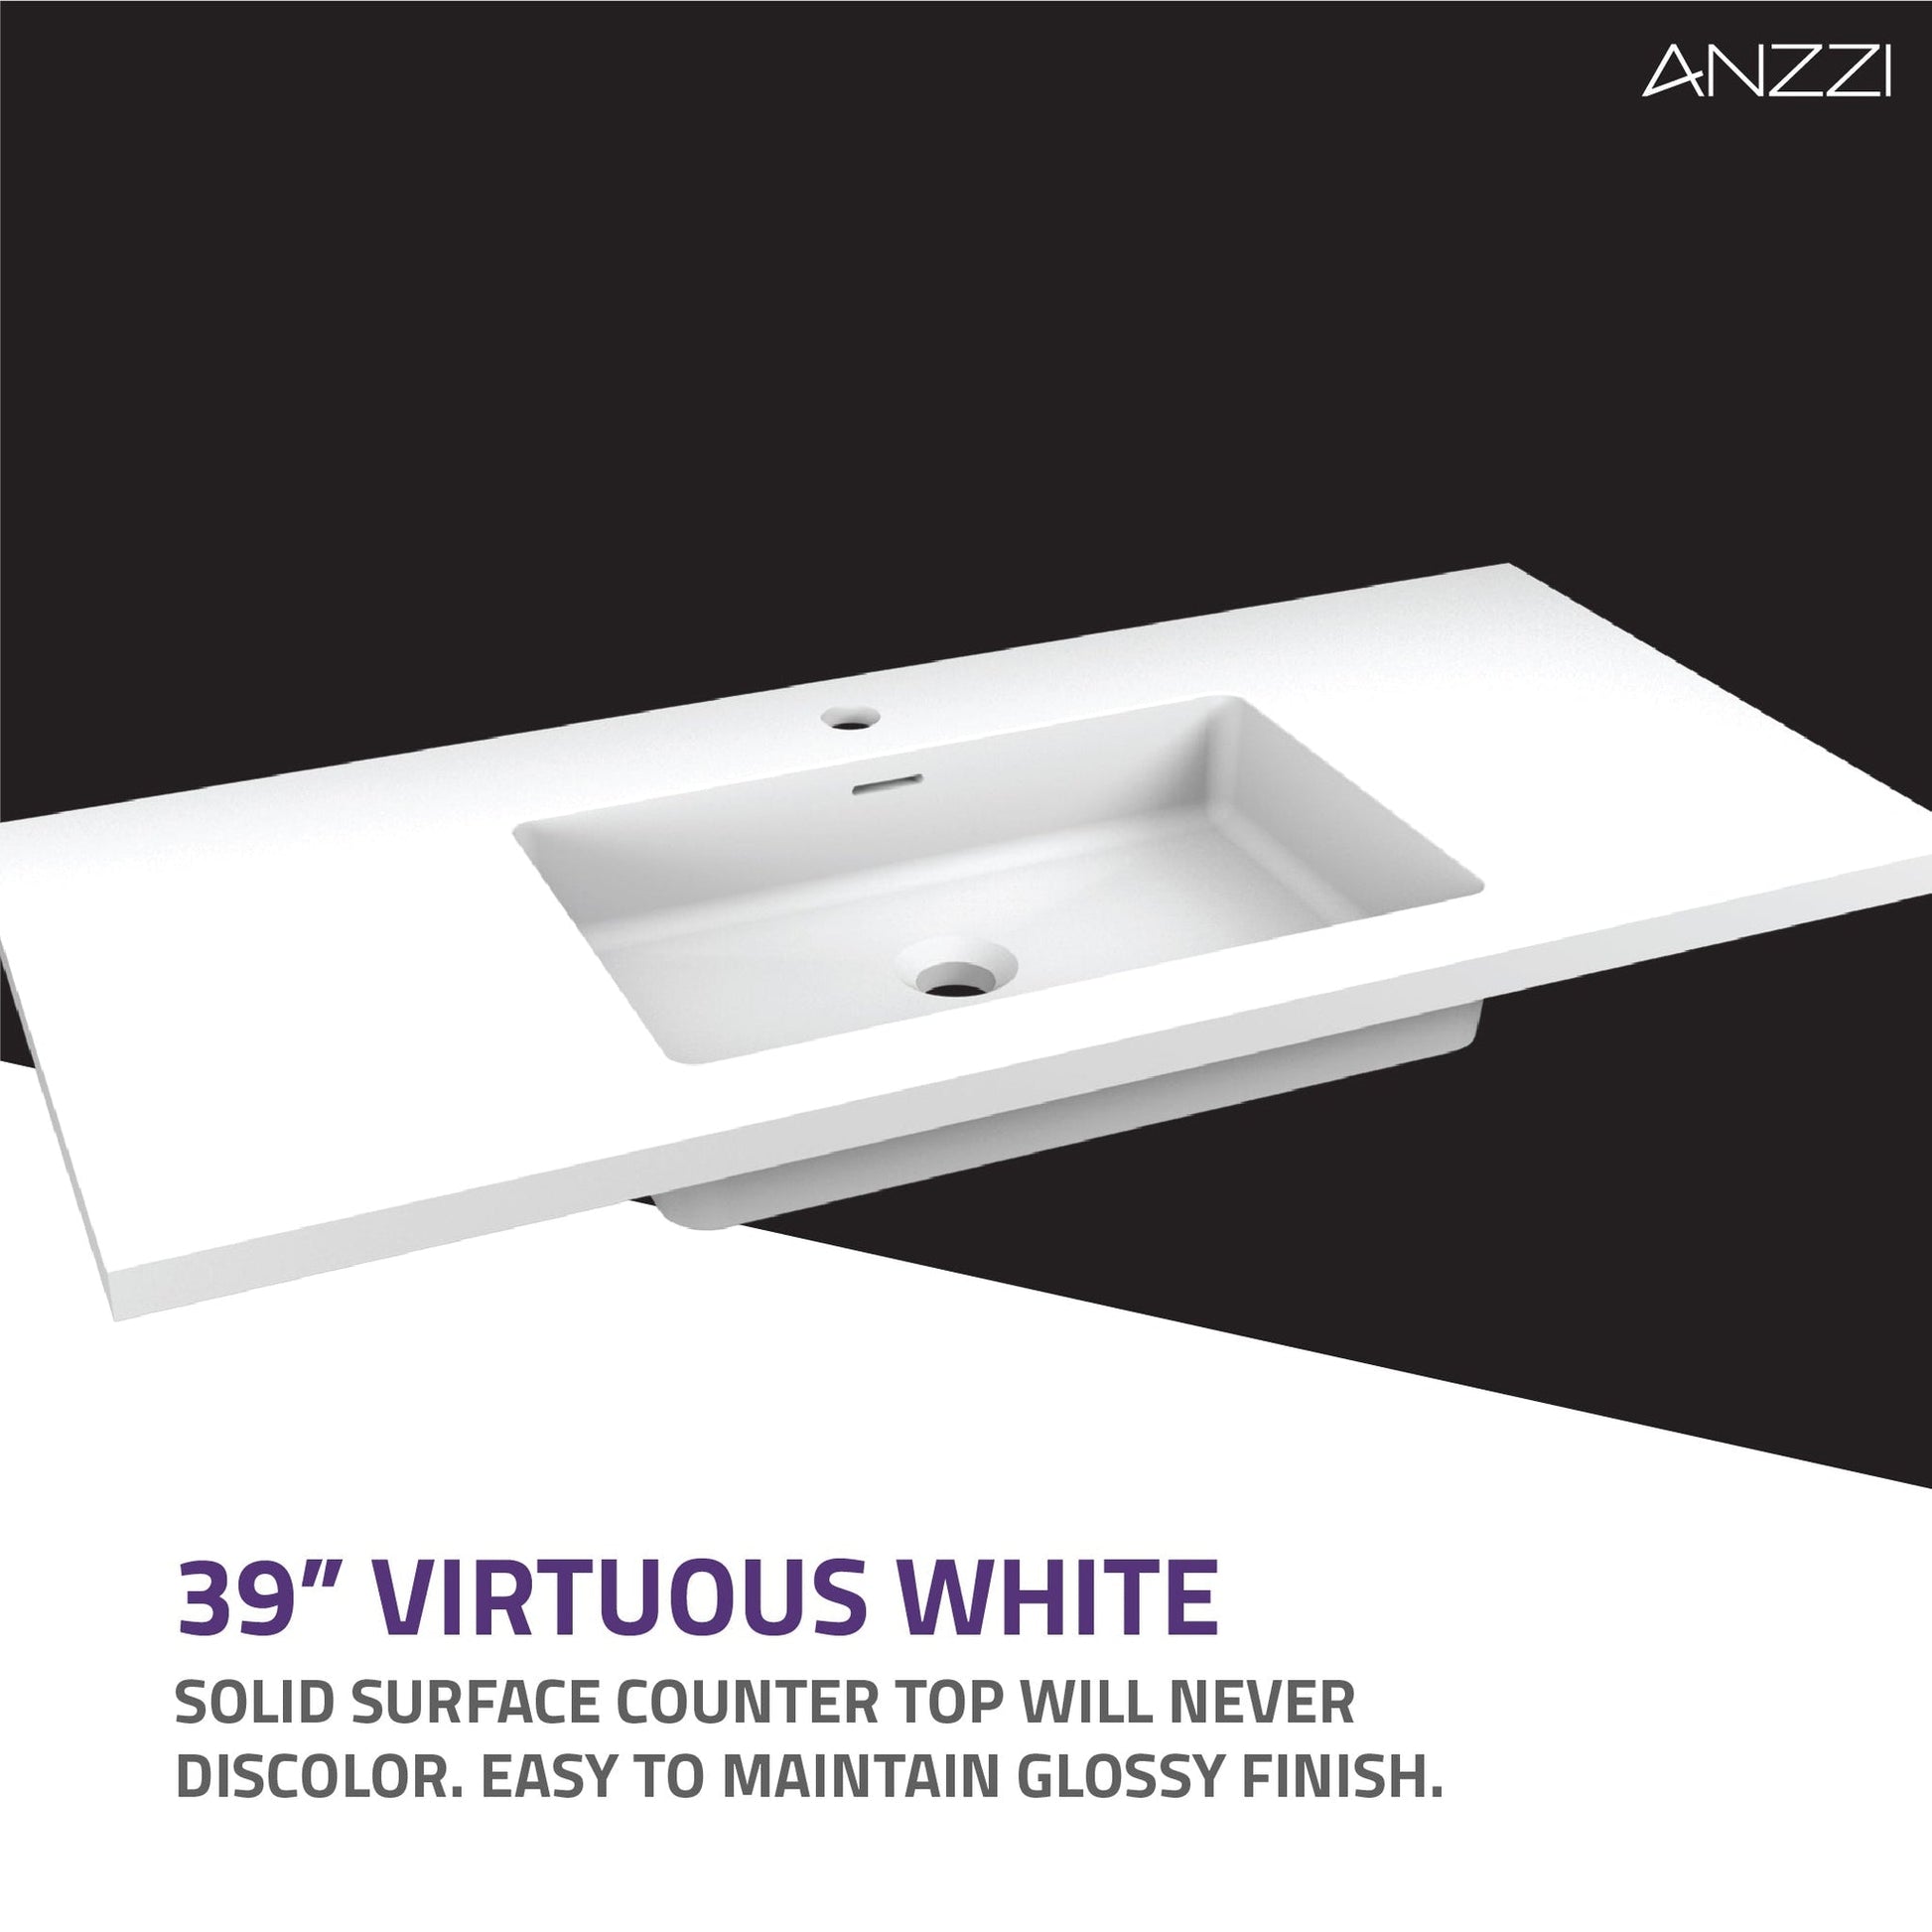 ANZZI Conques 39" x 20" Rich Gray Solid Wood Bathroom Vanity With Glossy White Sink and Countertop